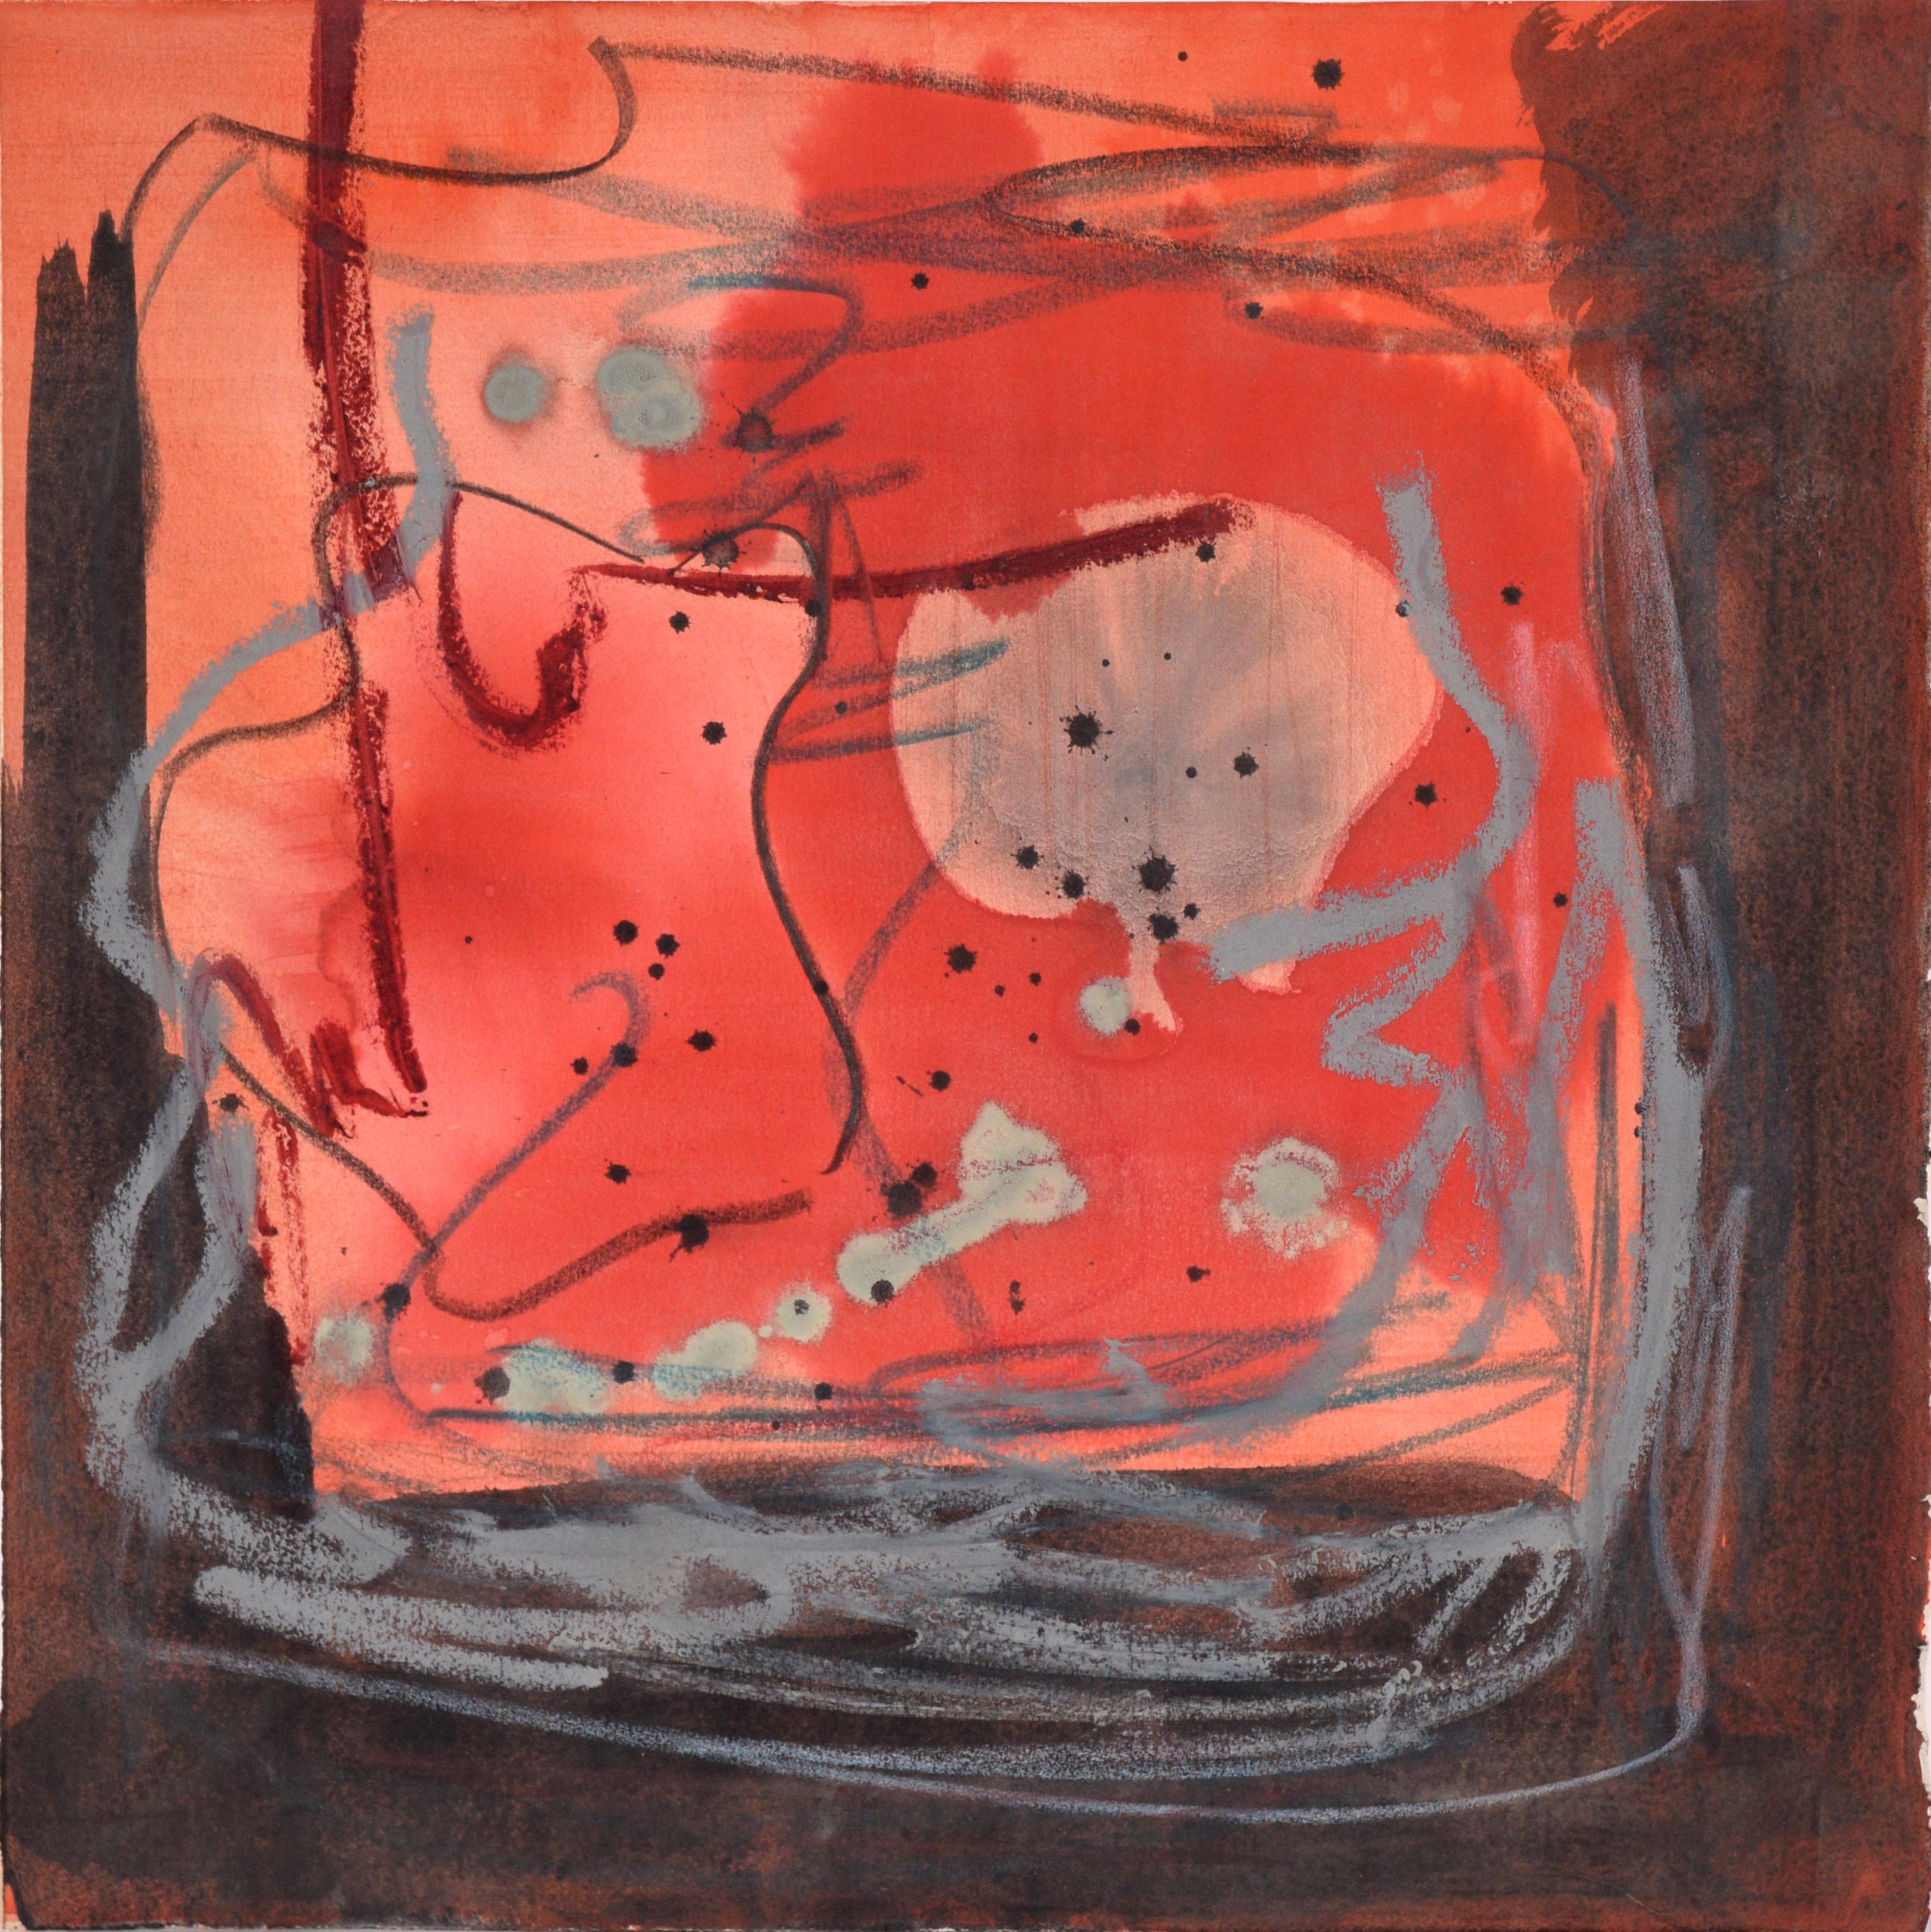 Ricardo de Silva Abstract Painting - Red Black and Grey Abstract Expressionist in Acrylic and Pastel on Paper